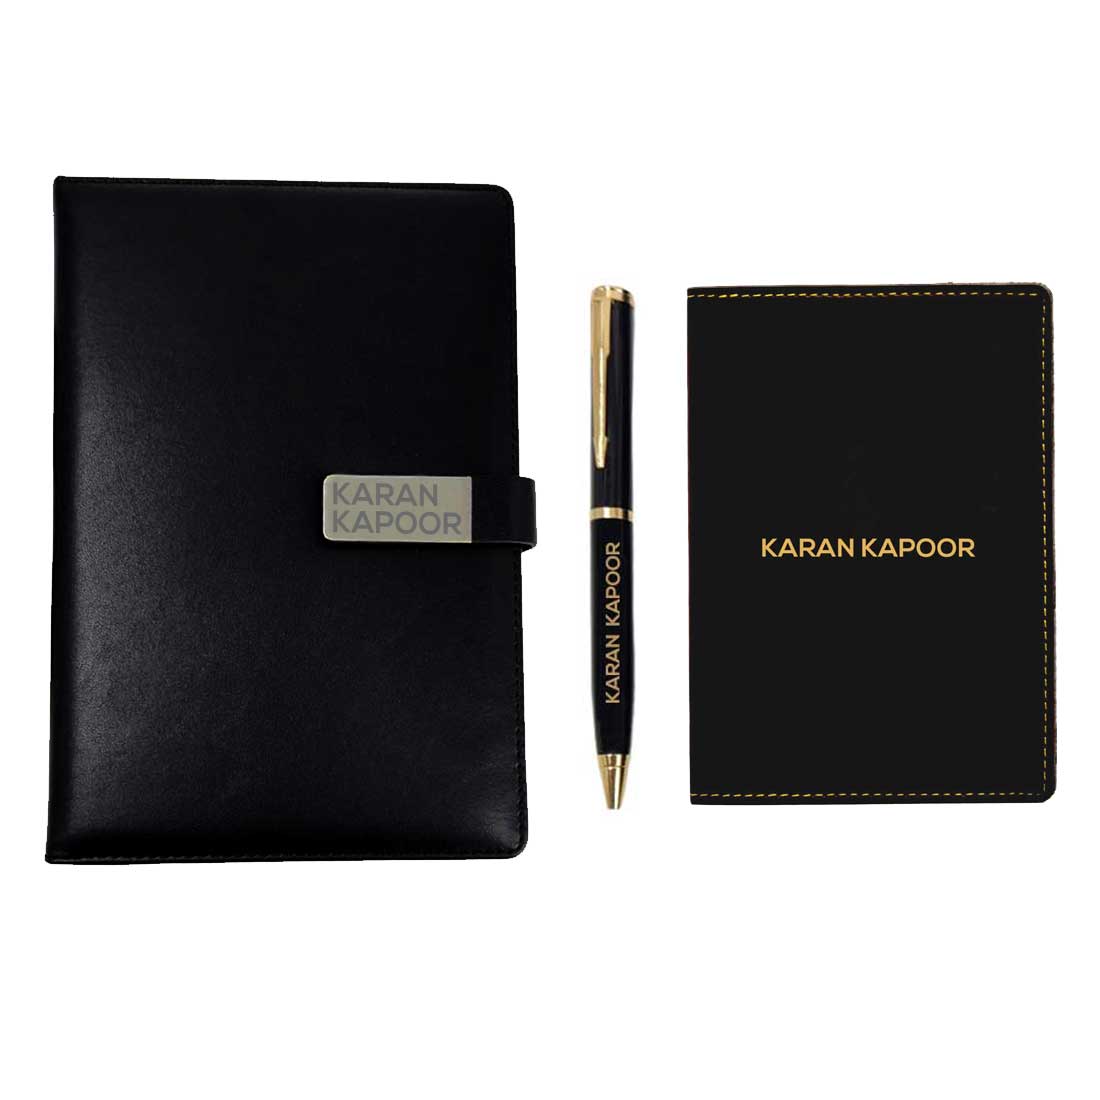 Leather Organizer Diary Pen Keychain Cardholder 4 in 1 Gift Set